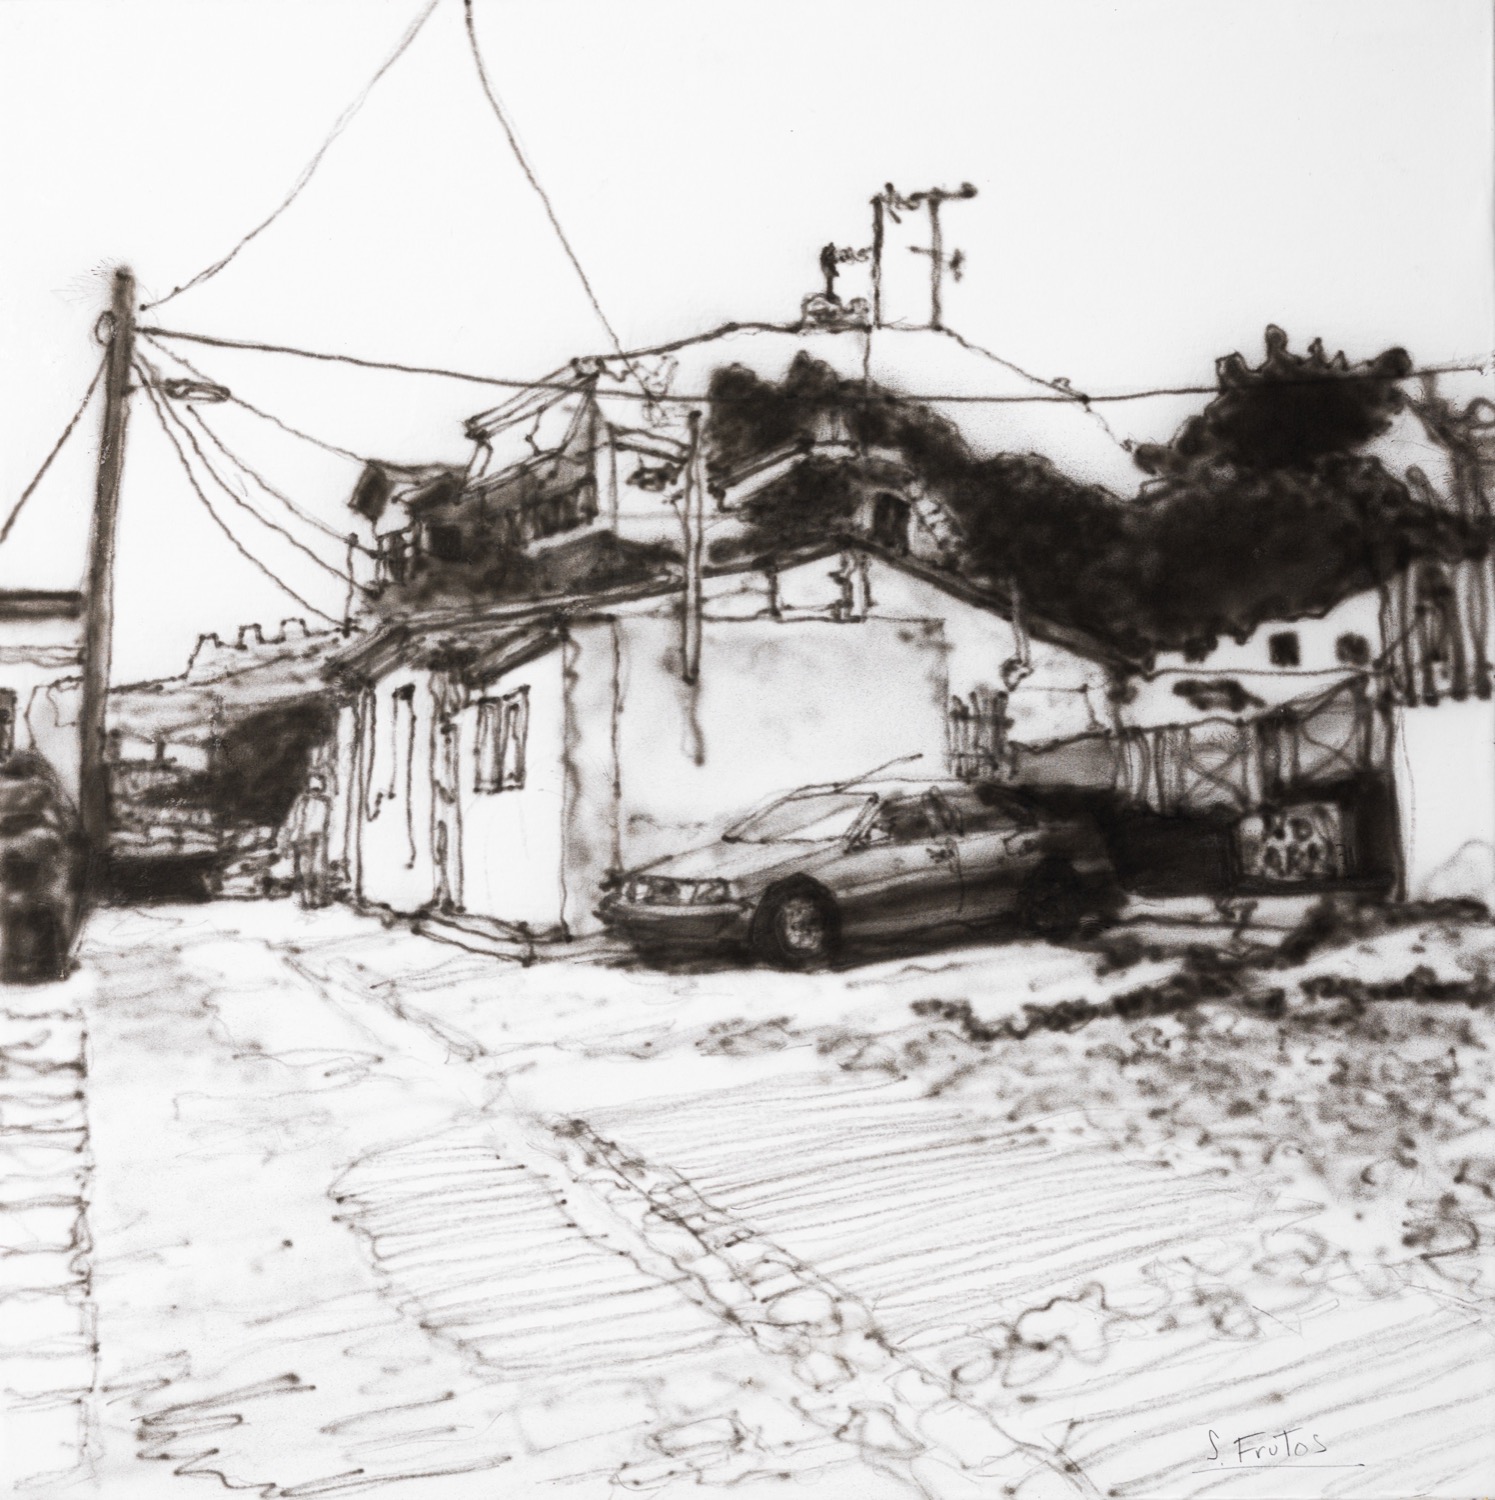 Anapoli, Thessalonika. Ink on paper on wood, 30 x 30 cm, 2019